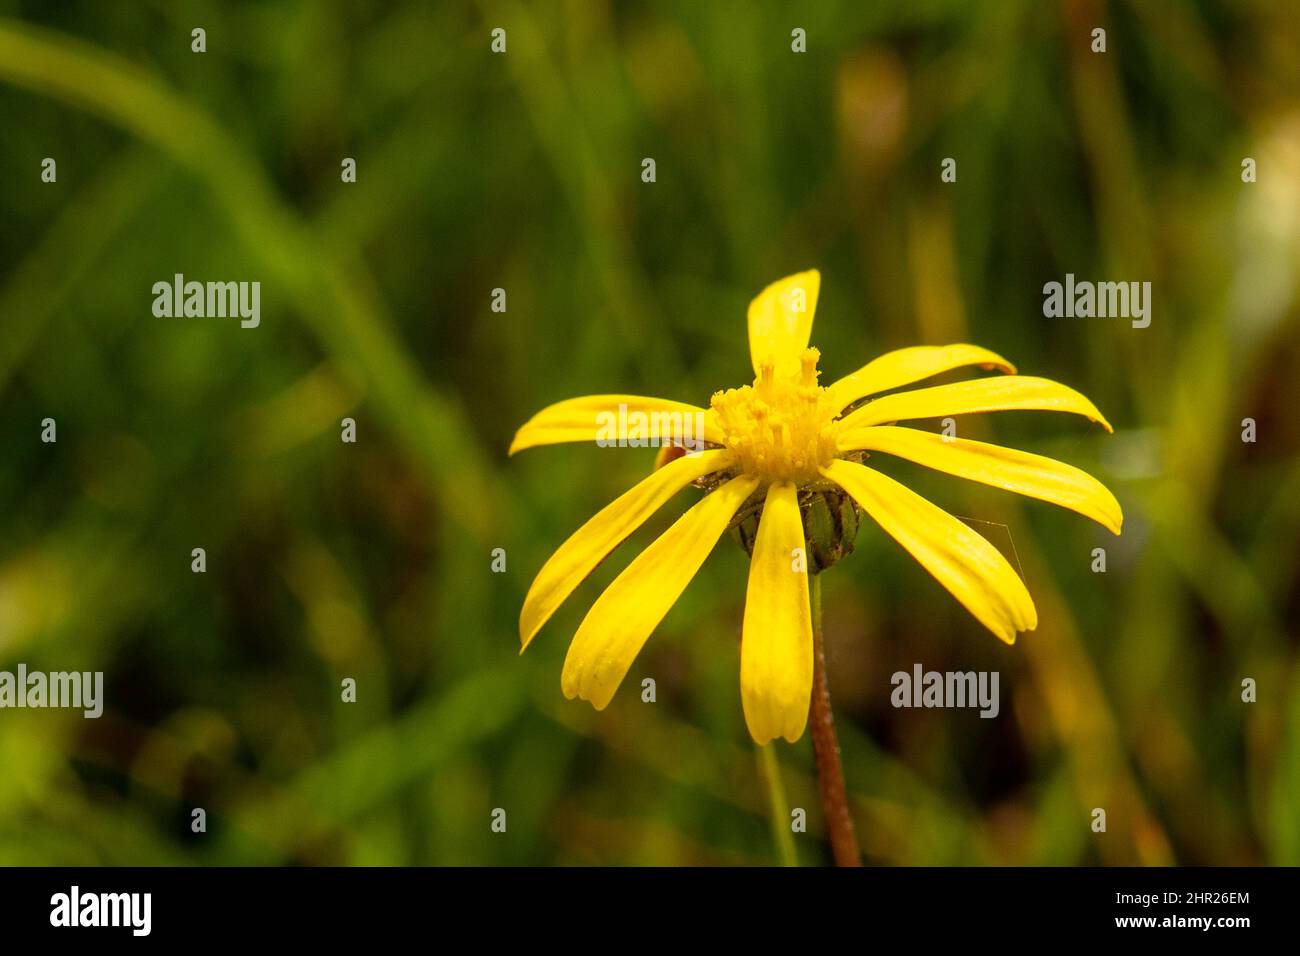 South African Wildflower: Yellow flower of an Aster (probably) close to Darling in the Western Cape of South Africa Stock Photo